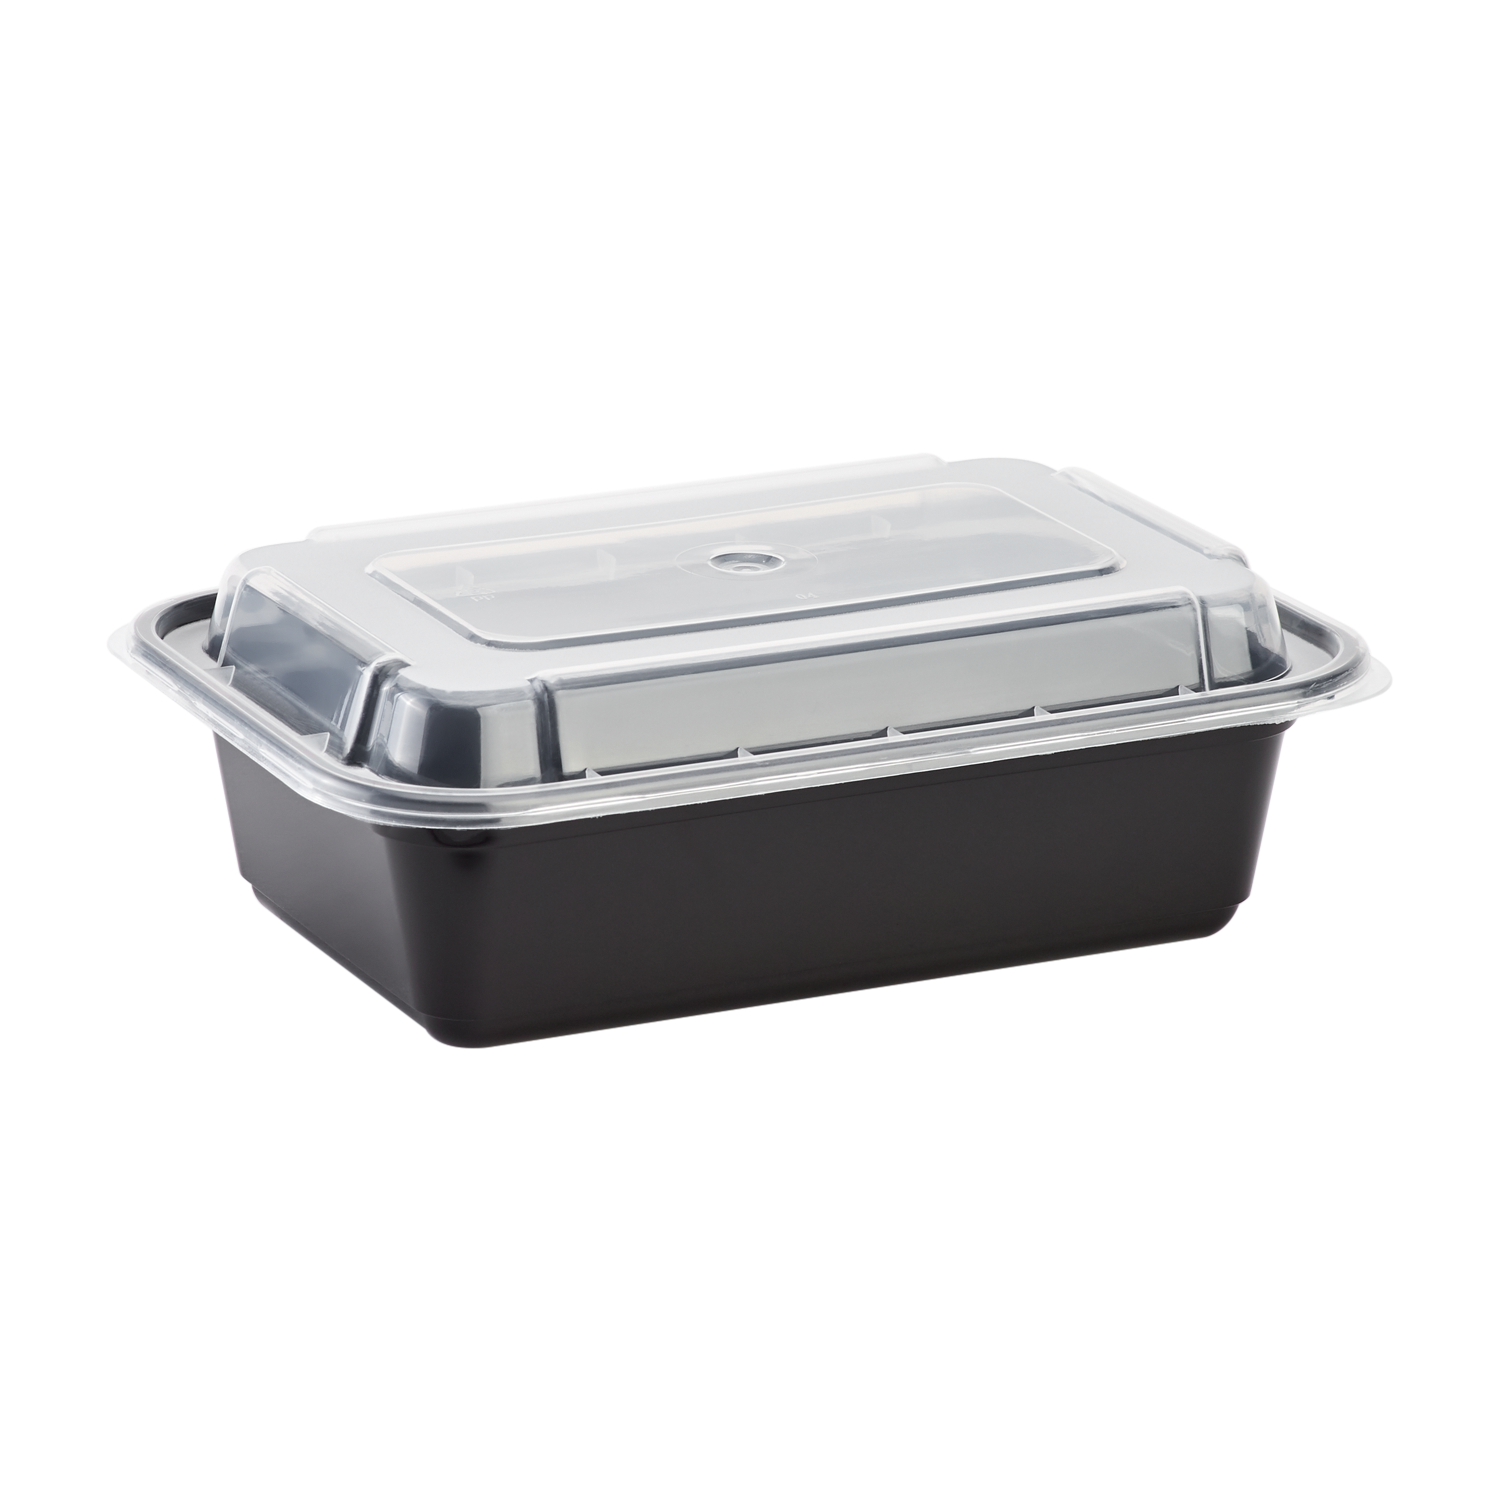 CTC-009] Round Meal Prep Bowl Conainter with Lids - 24oz (50/100